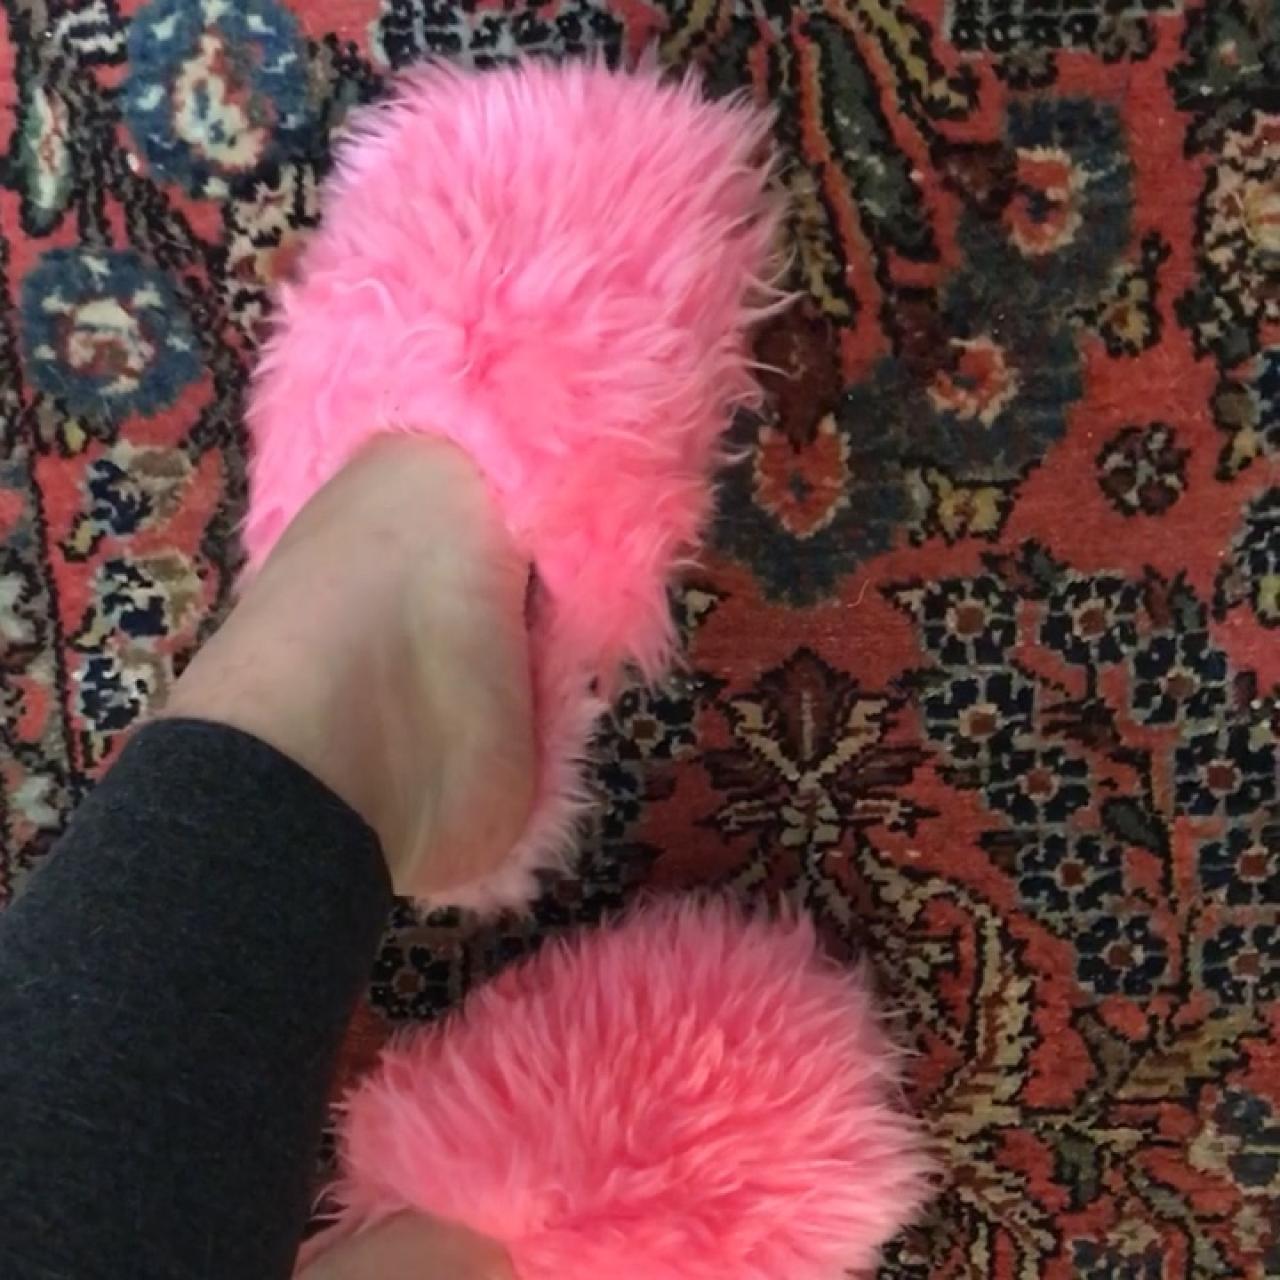 vintage fuzzy slippers